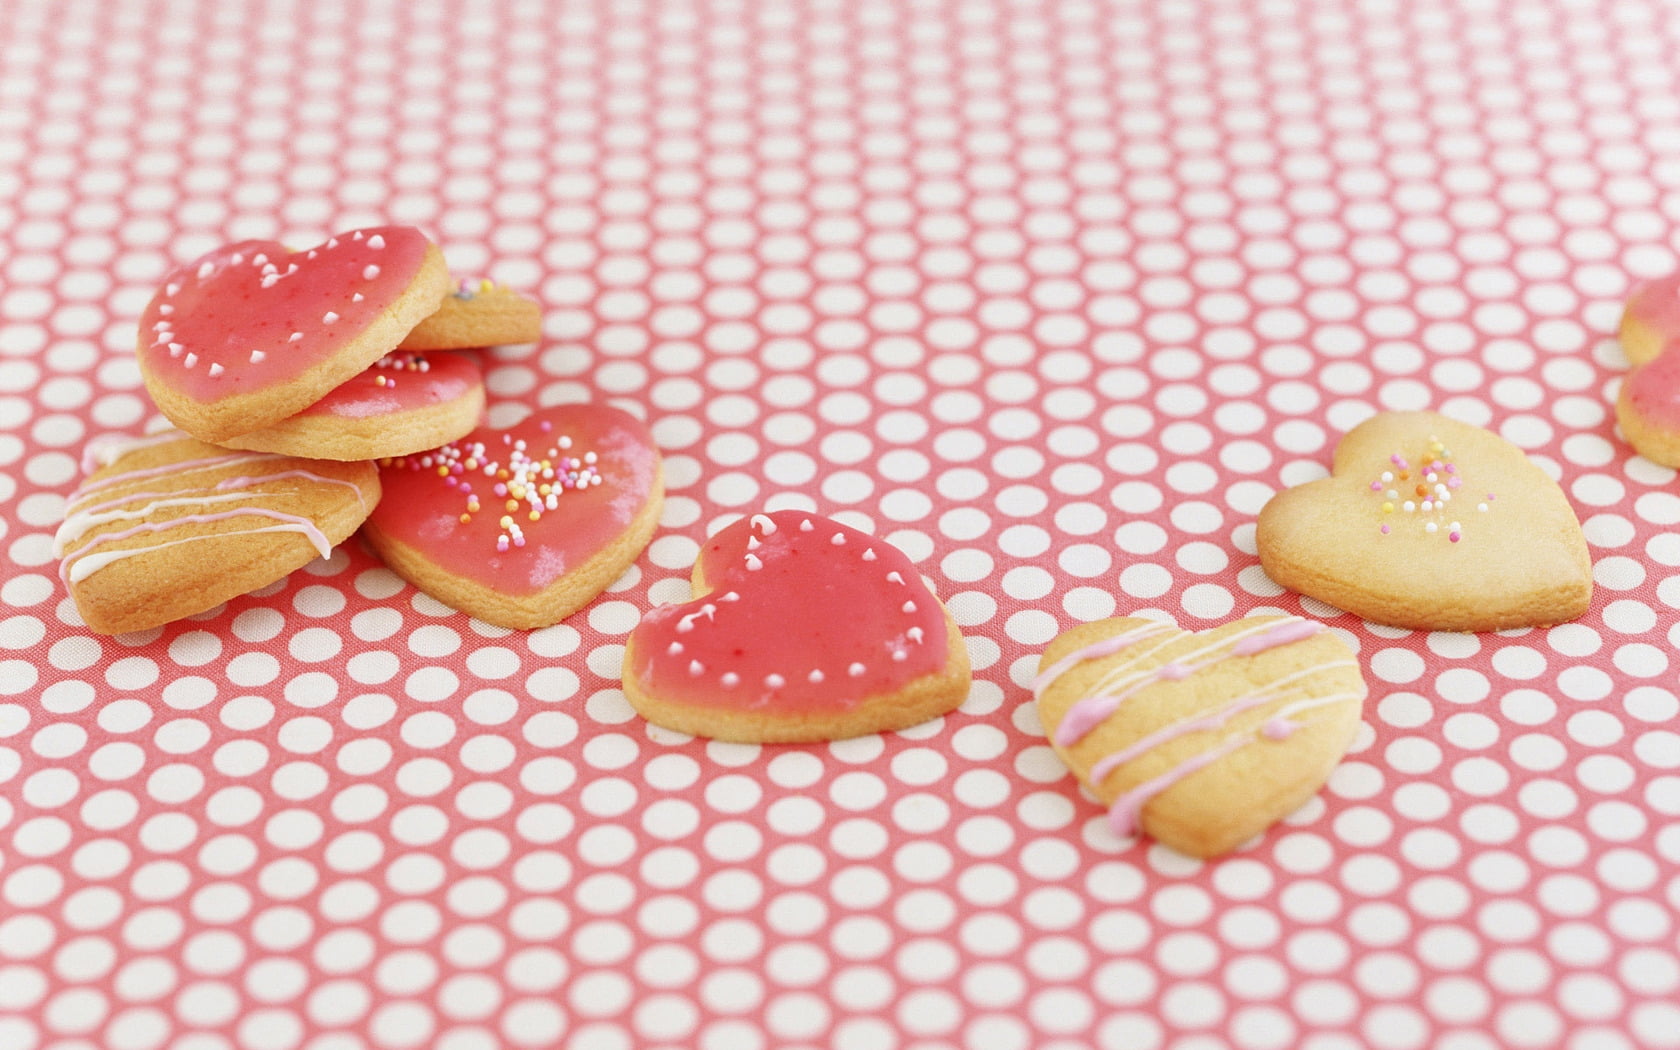 heart biscuits with cream